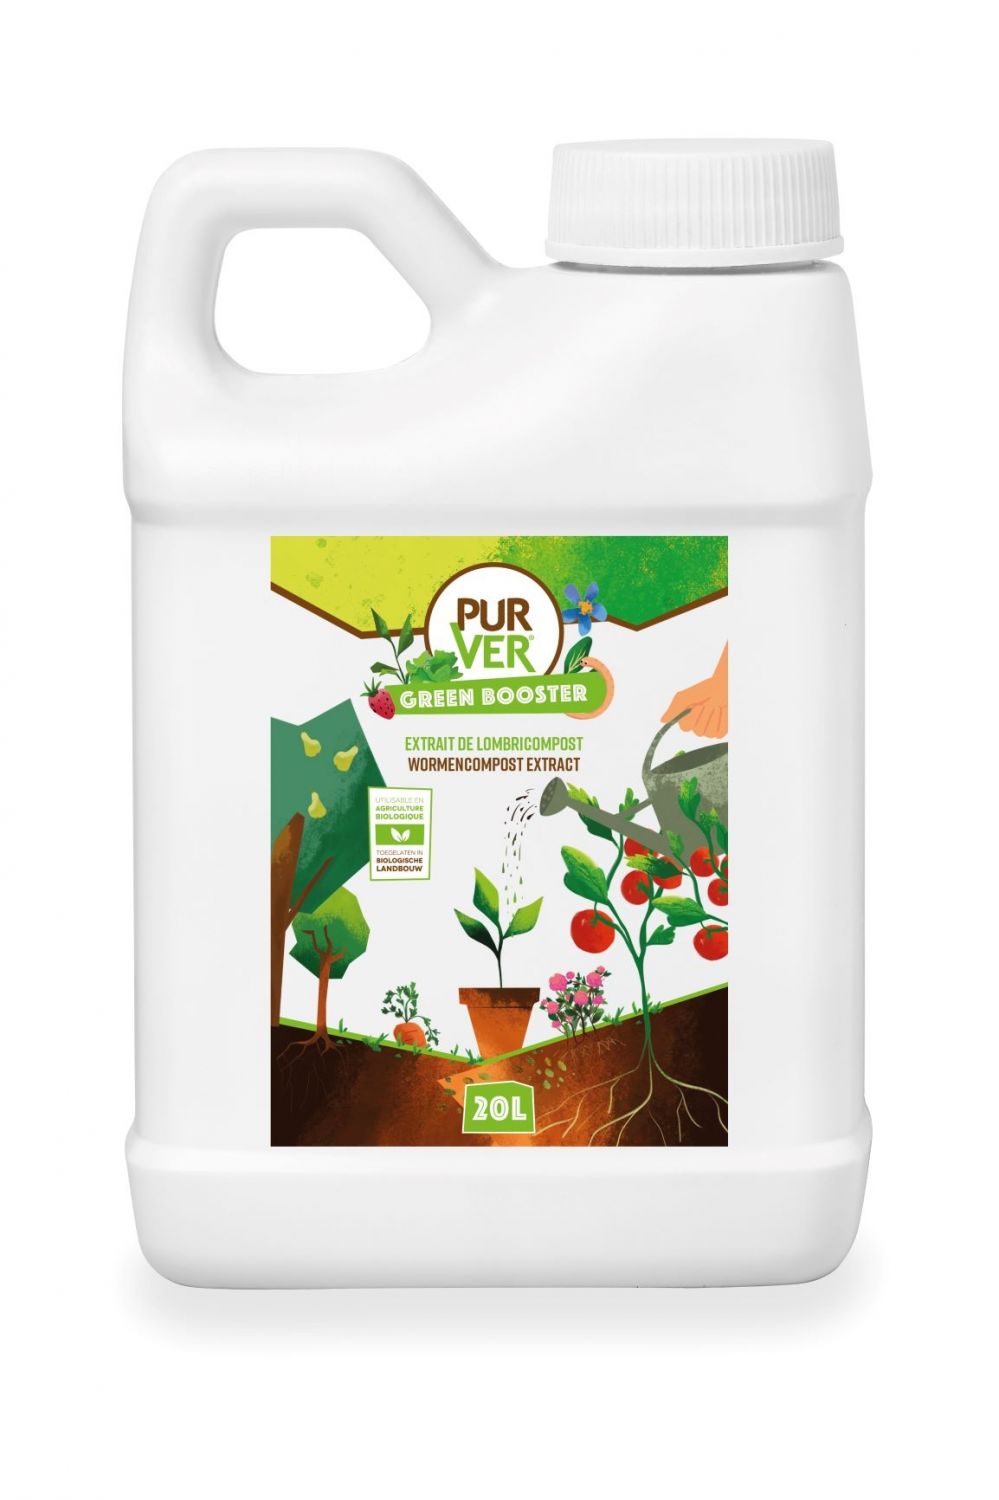 PUR VER GREEN BOOSTER - 20 L